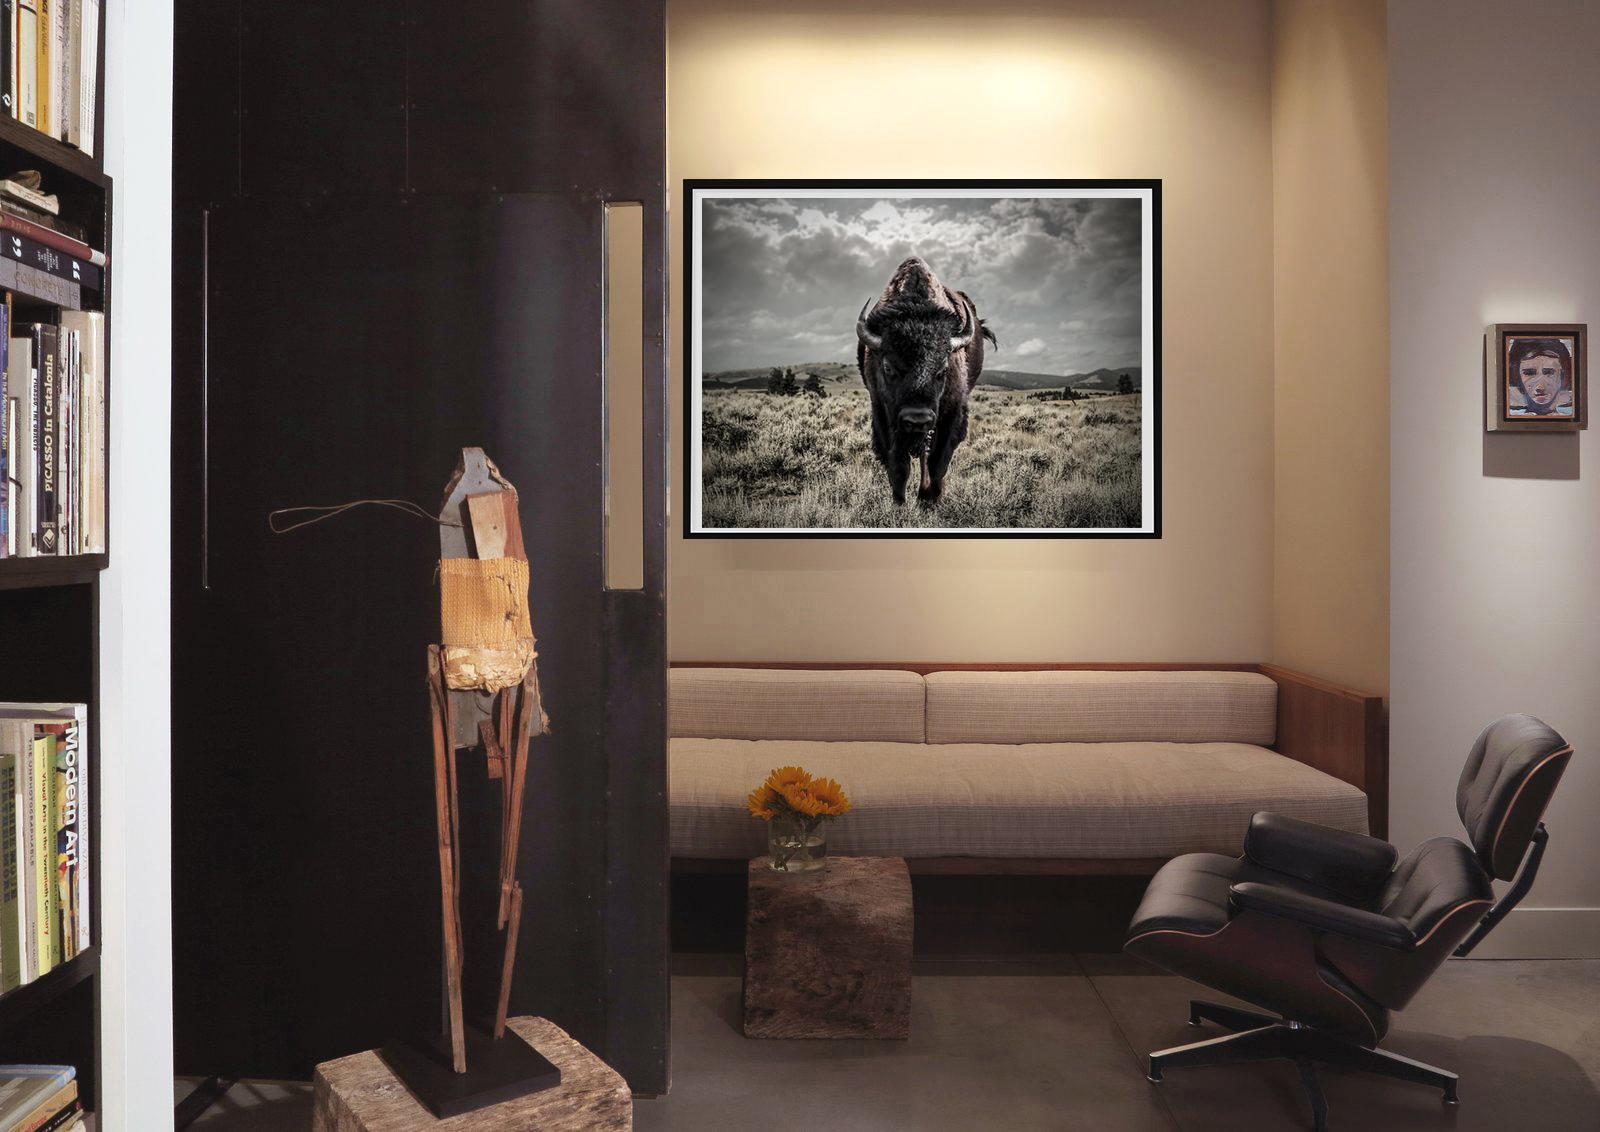 This is a contemporary photograph of an American Bison. 
40x50 Unsigned print 
Printed on archival paper and using archival inks
Framing available. Inquire for rates. 

Shane Russeck has built a reputation for capturing America's landscapes,